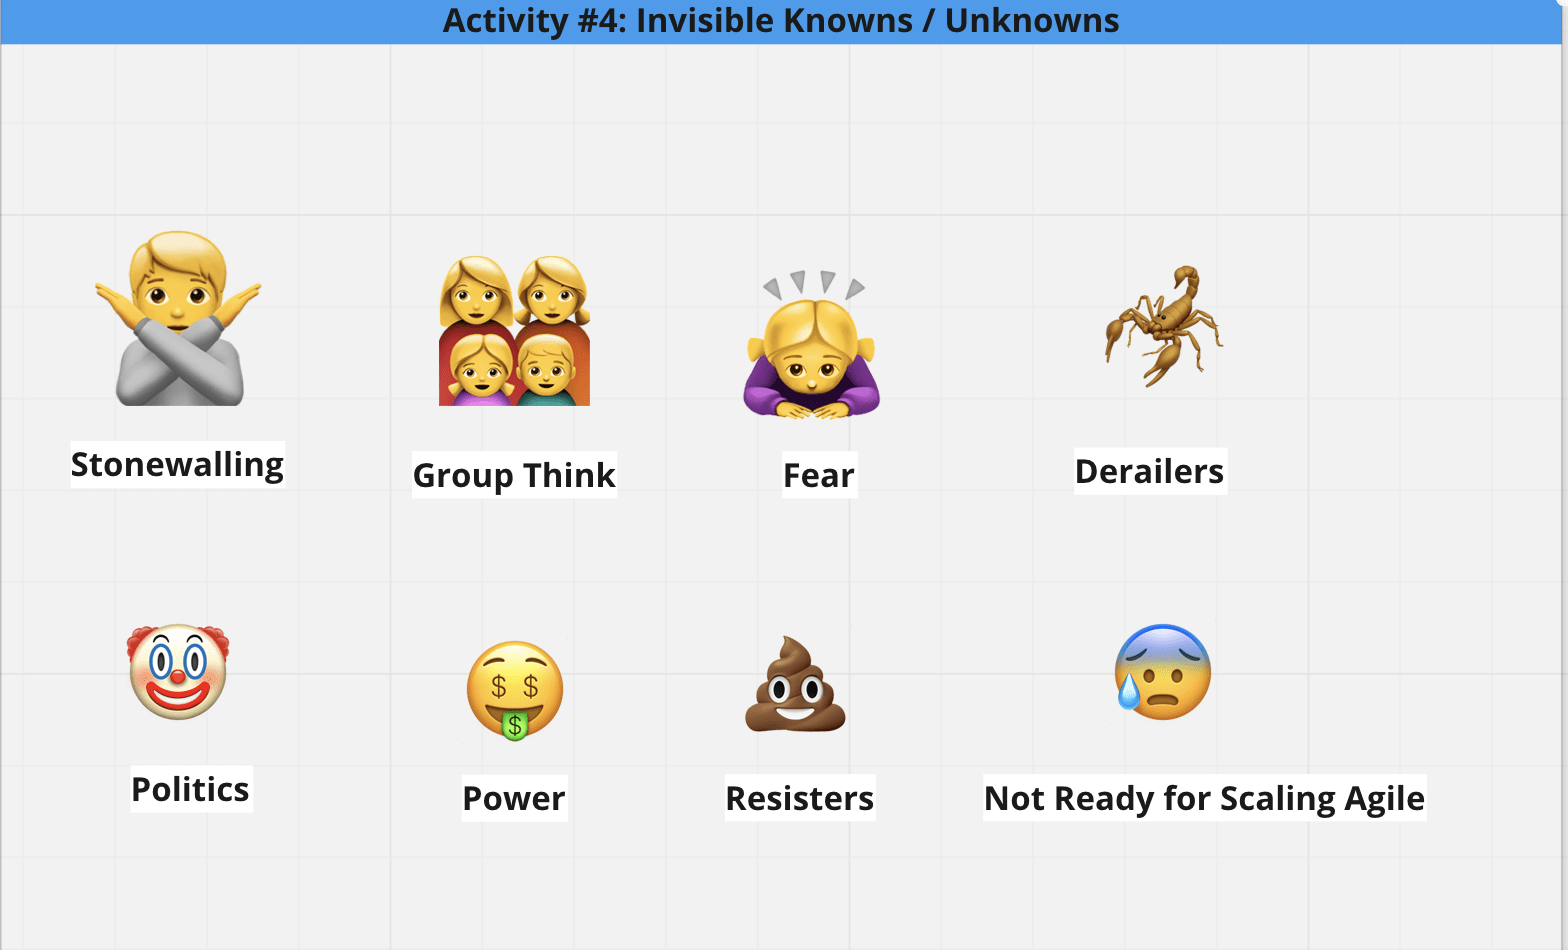 Invisible Knowns / Unknowns